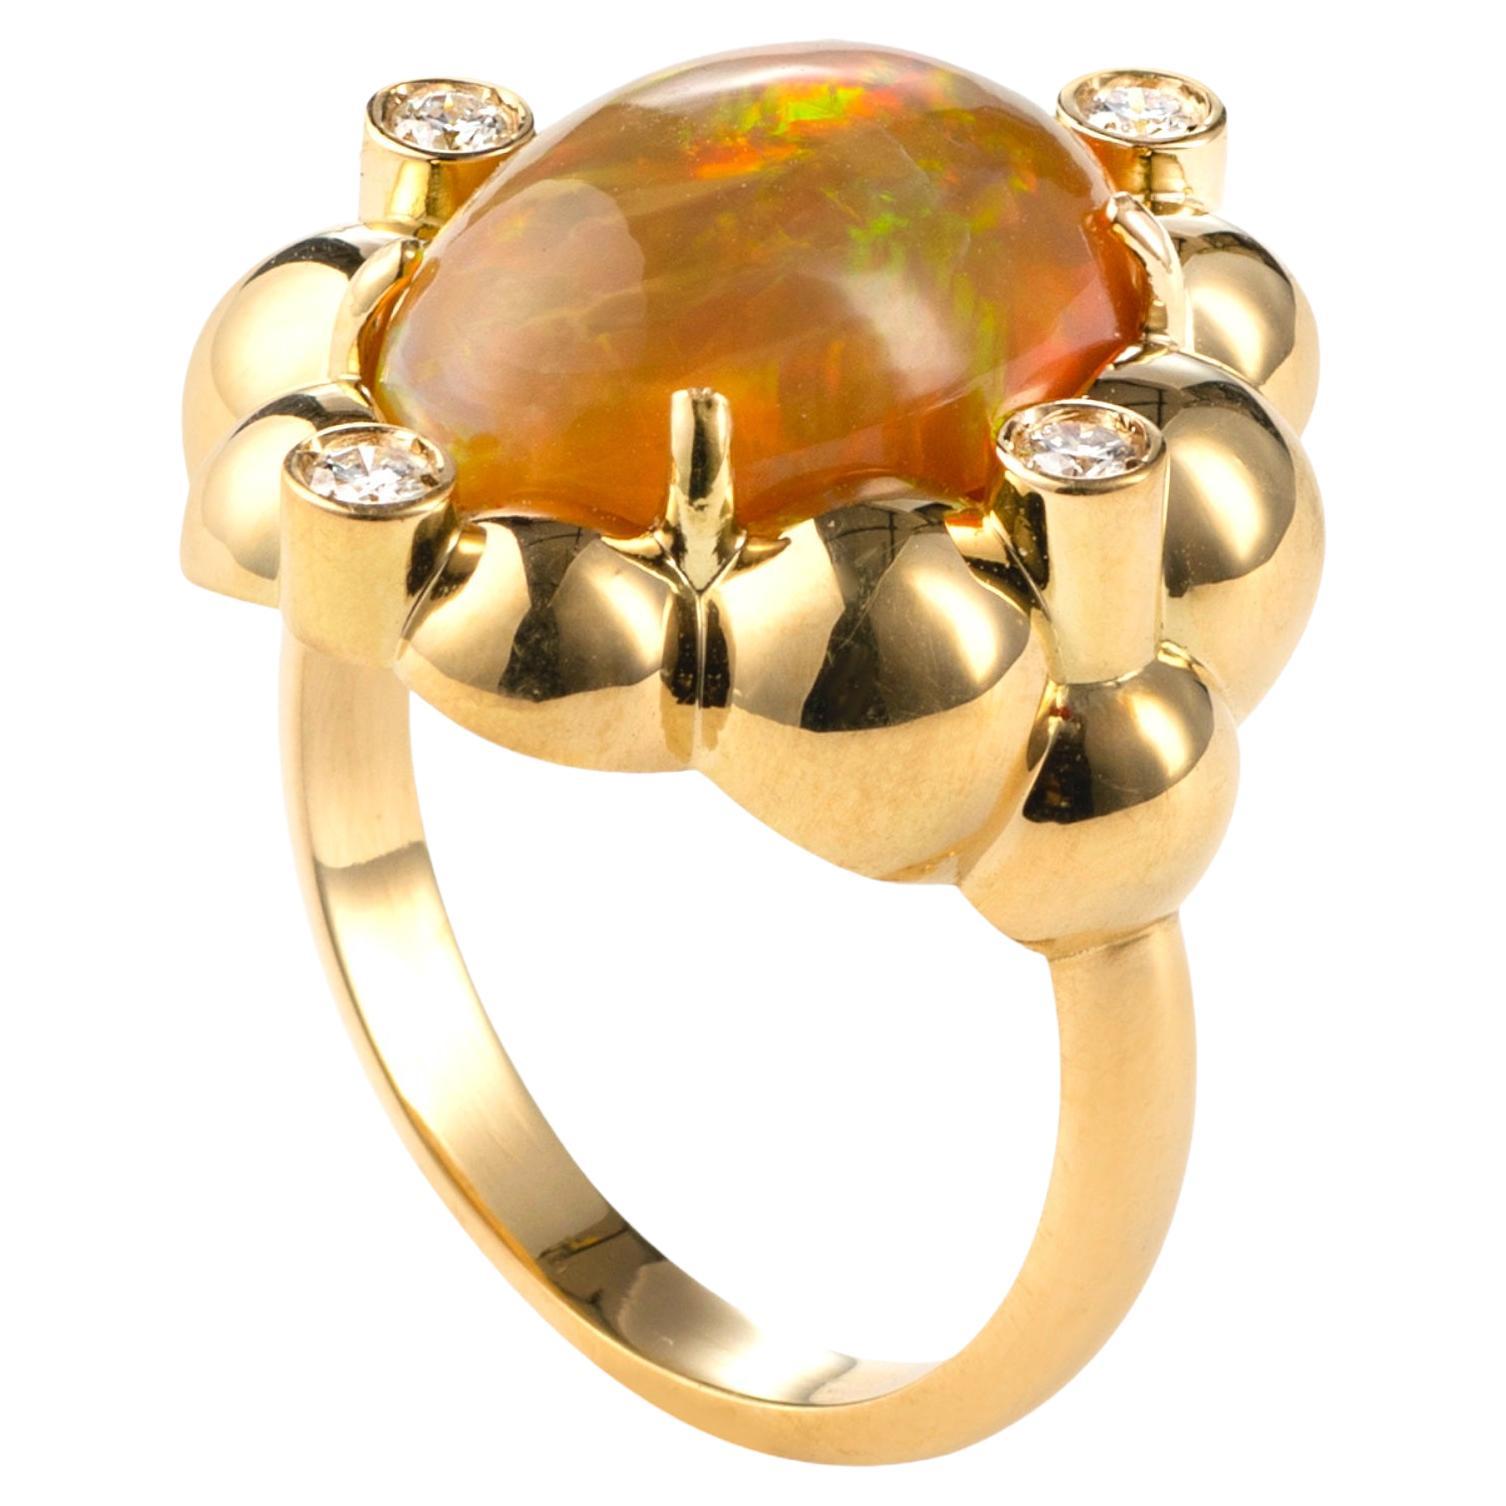 Maria Kotsoni Contemporary 18k YellowGold Oval Cabochon Ethiopian Opal Dome Ring For Sale